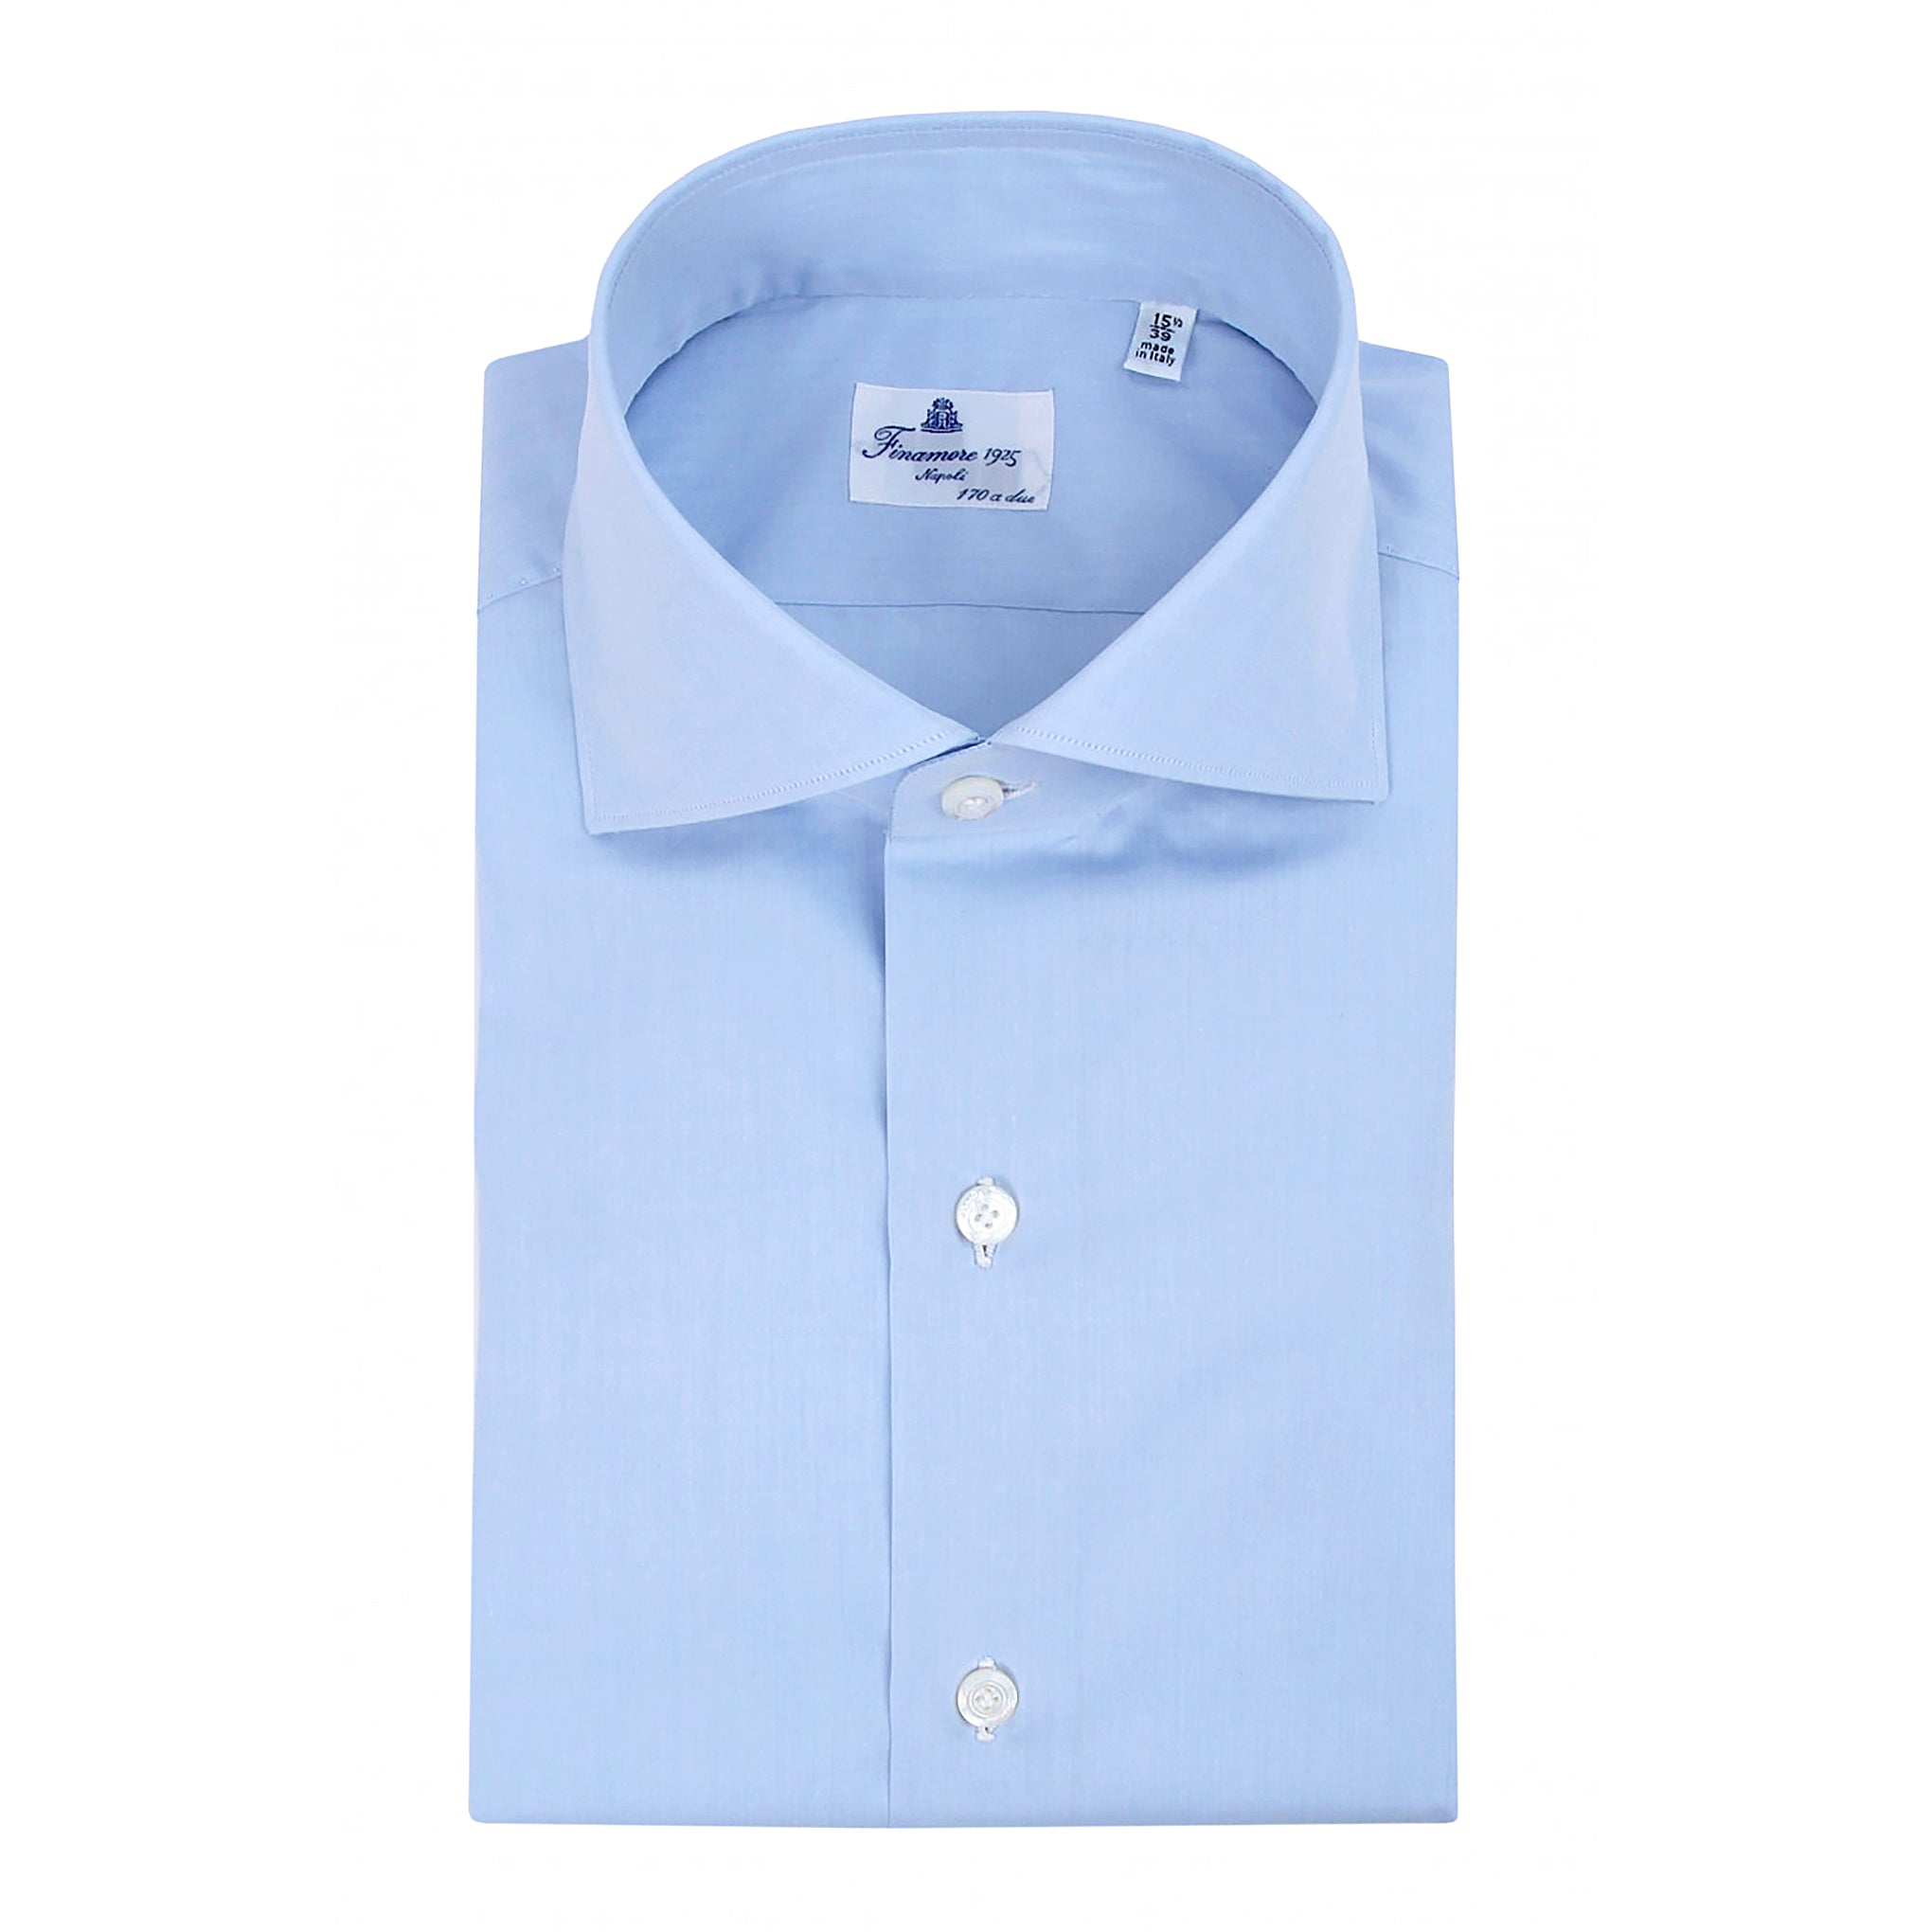 Milano 170 a due dress slim fit light blue french collar. Finamore 1925